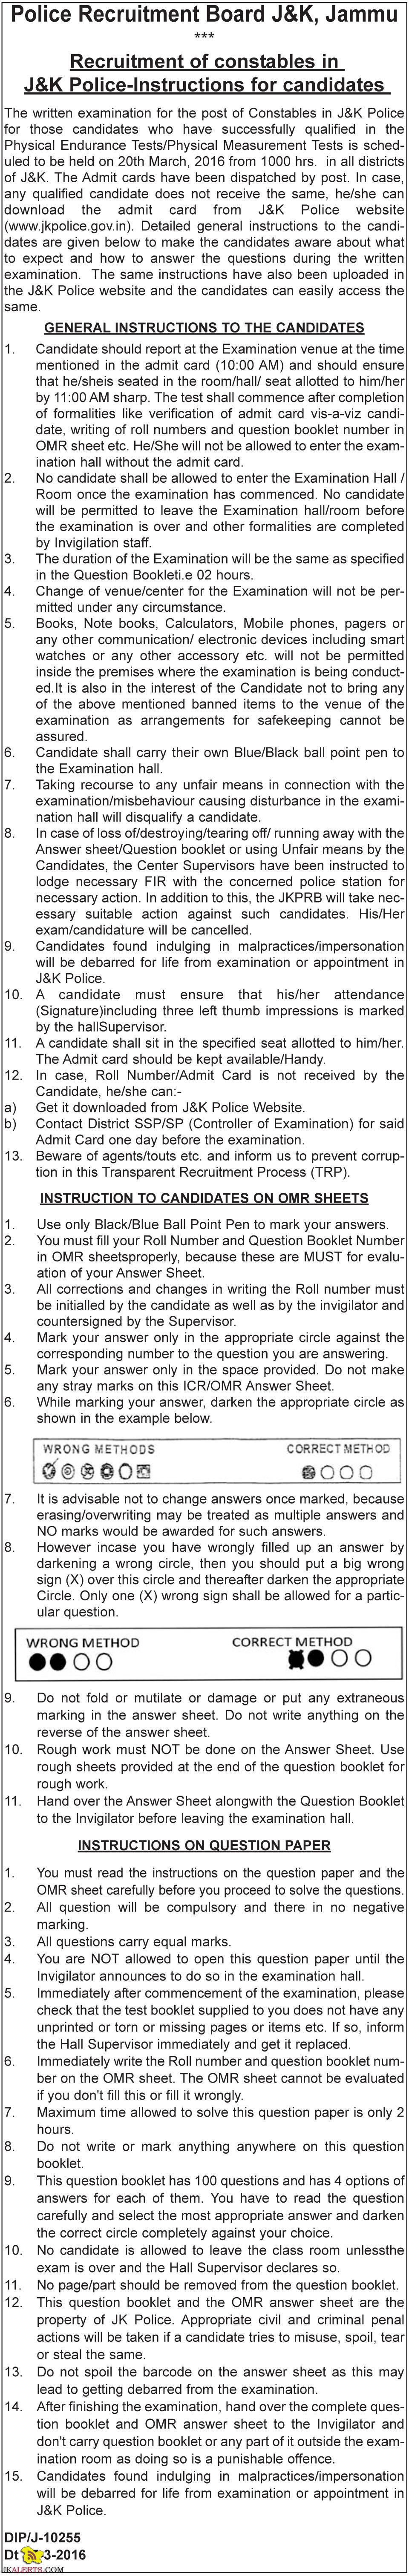 Recruitment of constables in J&K Police-Instructions for candidates